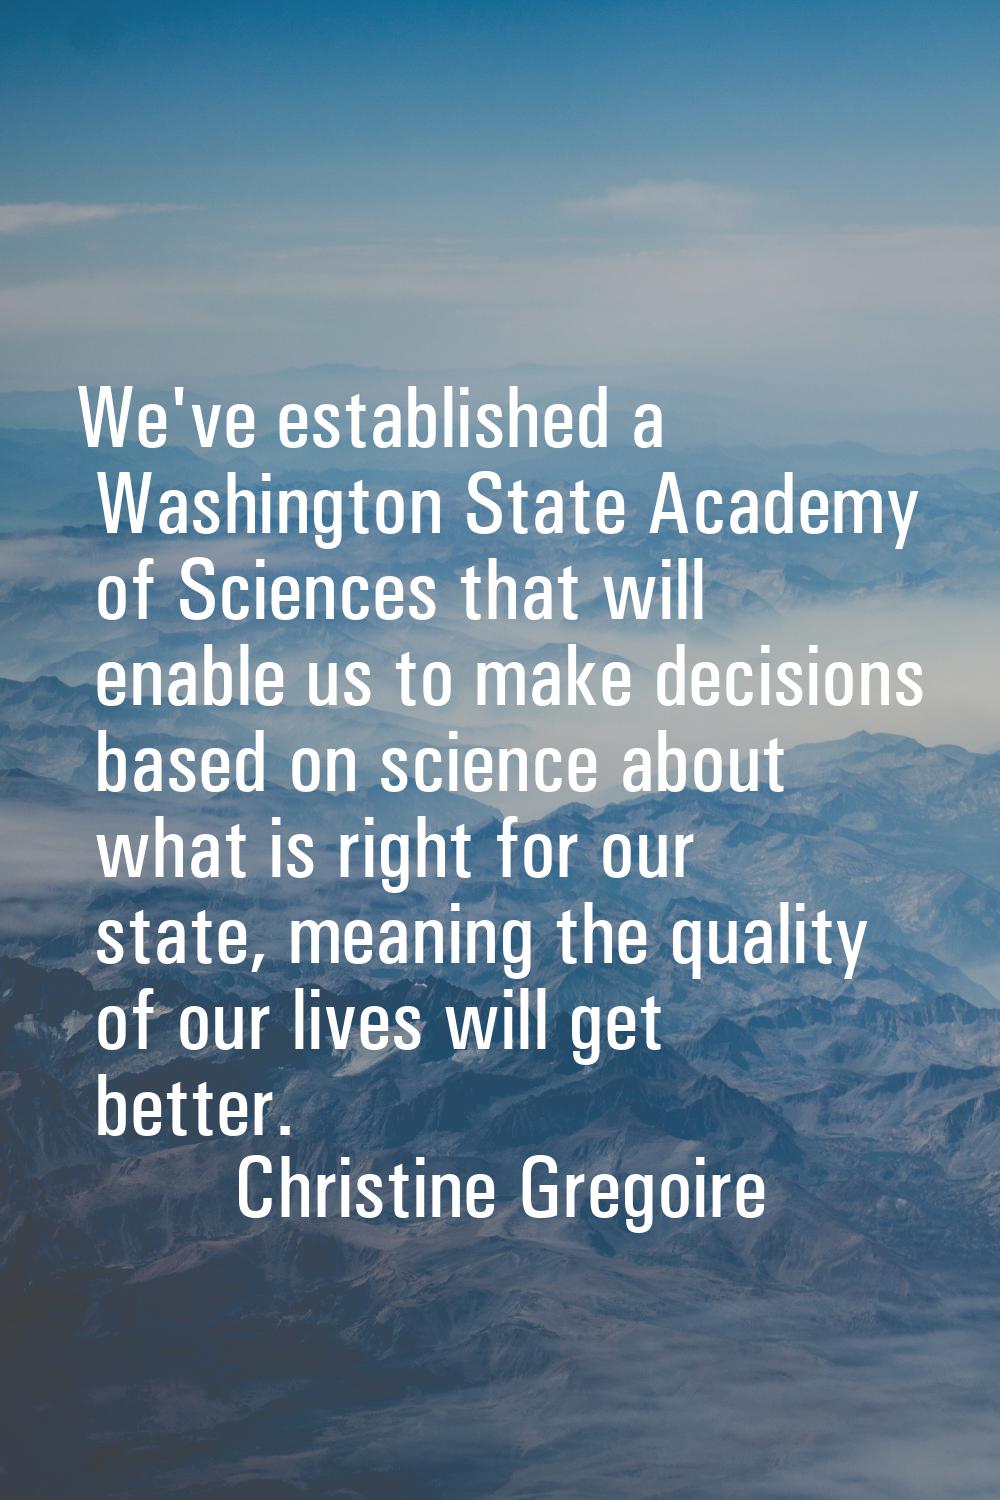 We've established a Washington State Academy of Sciences that will enable us to make decisions base